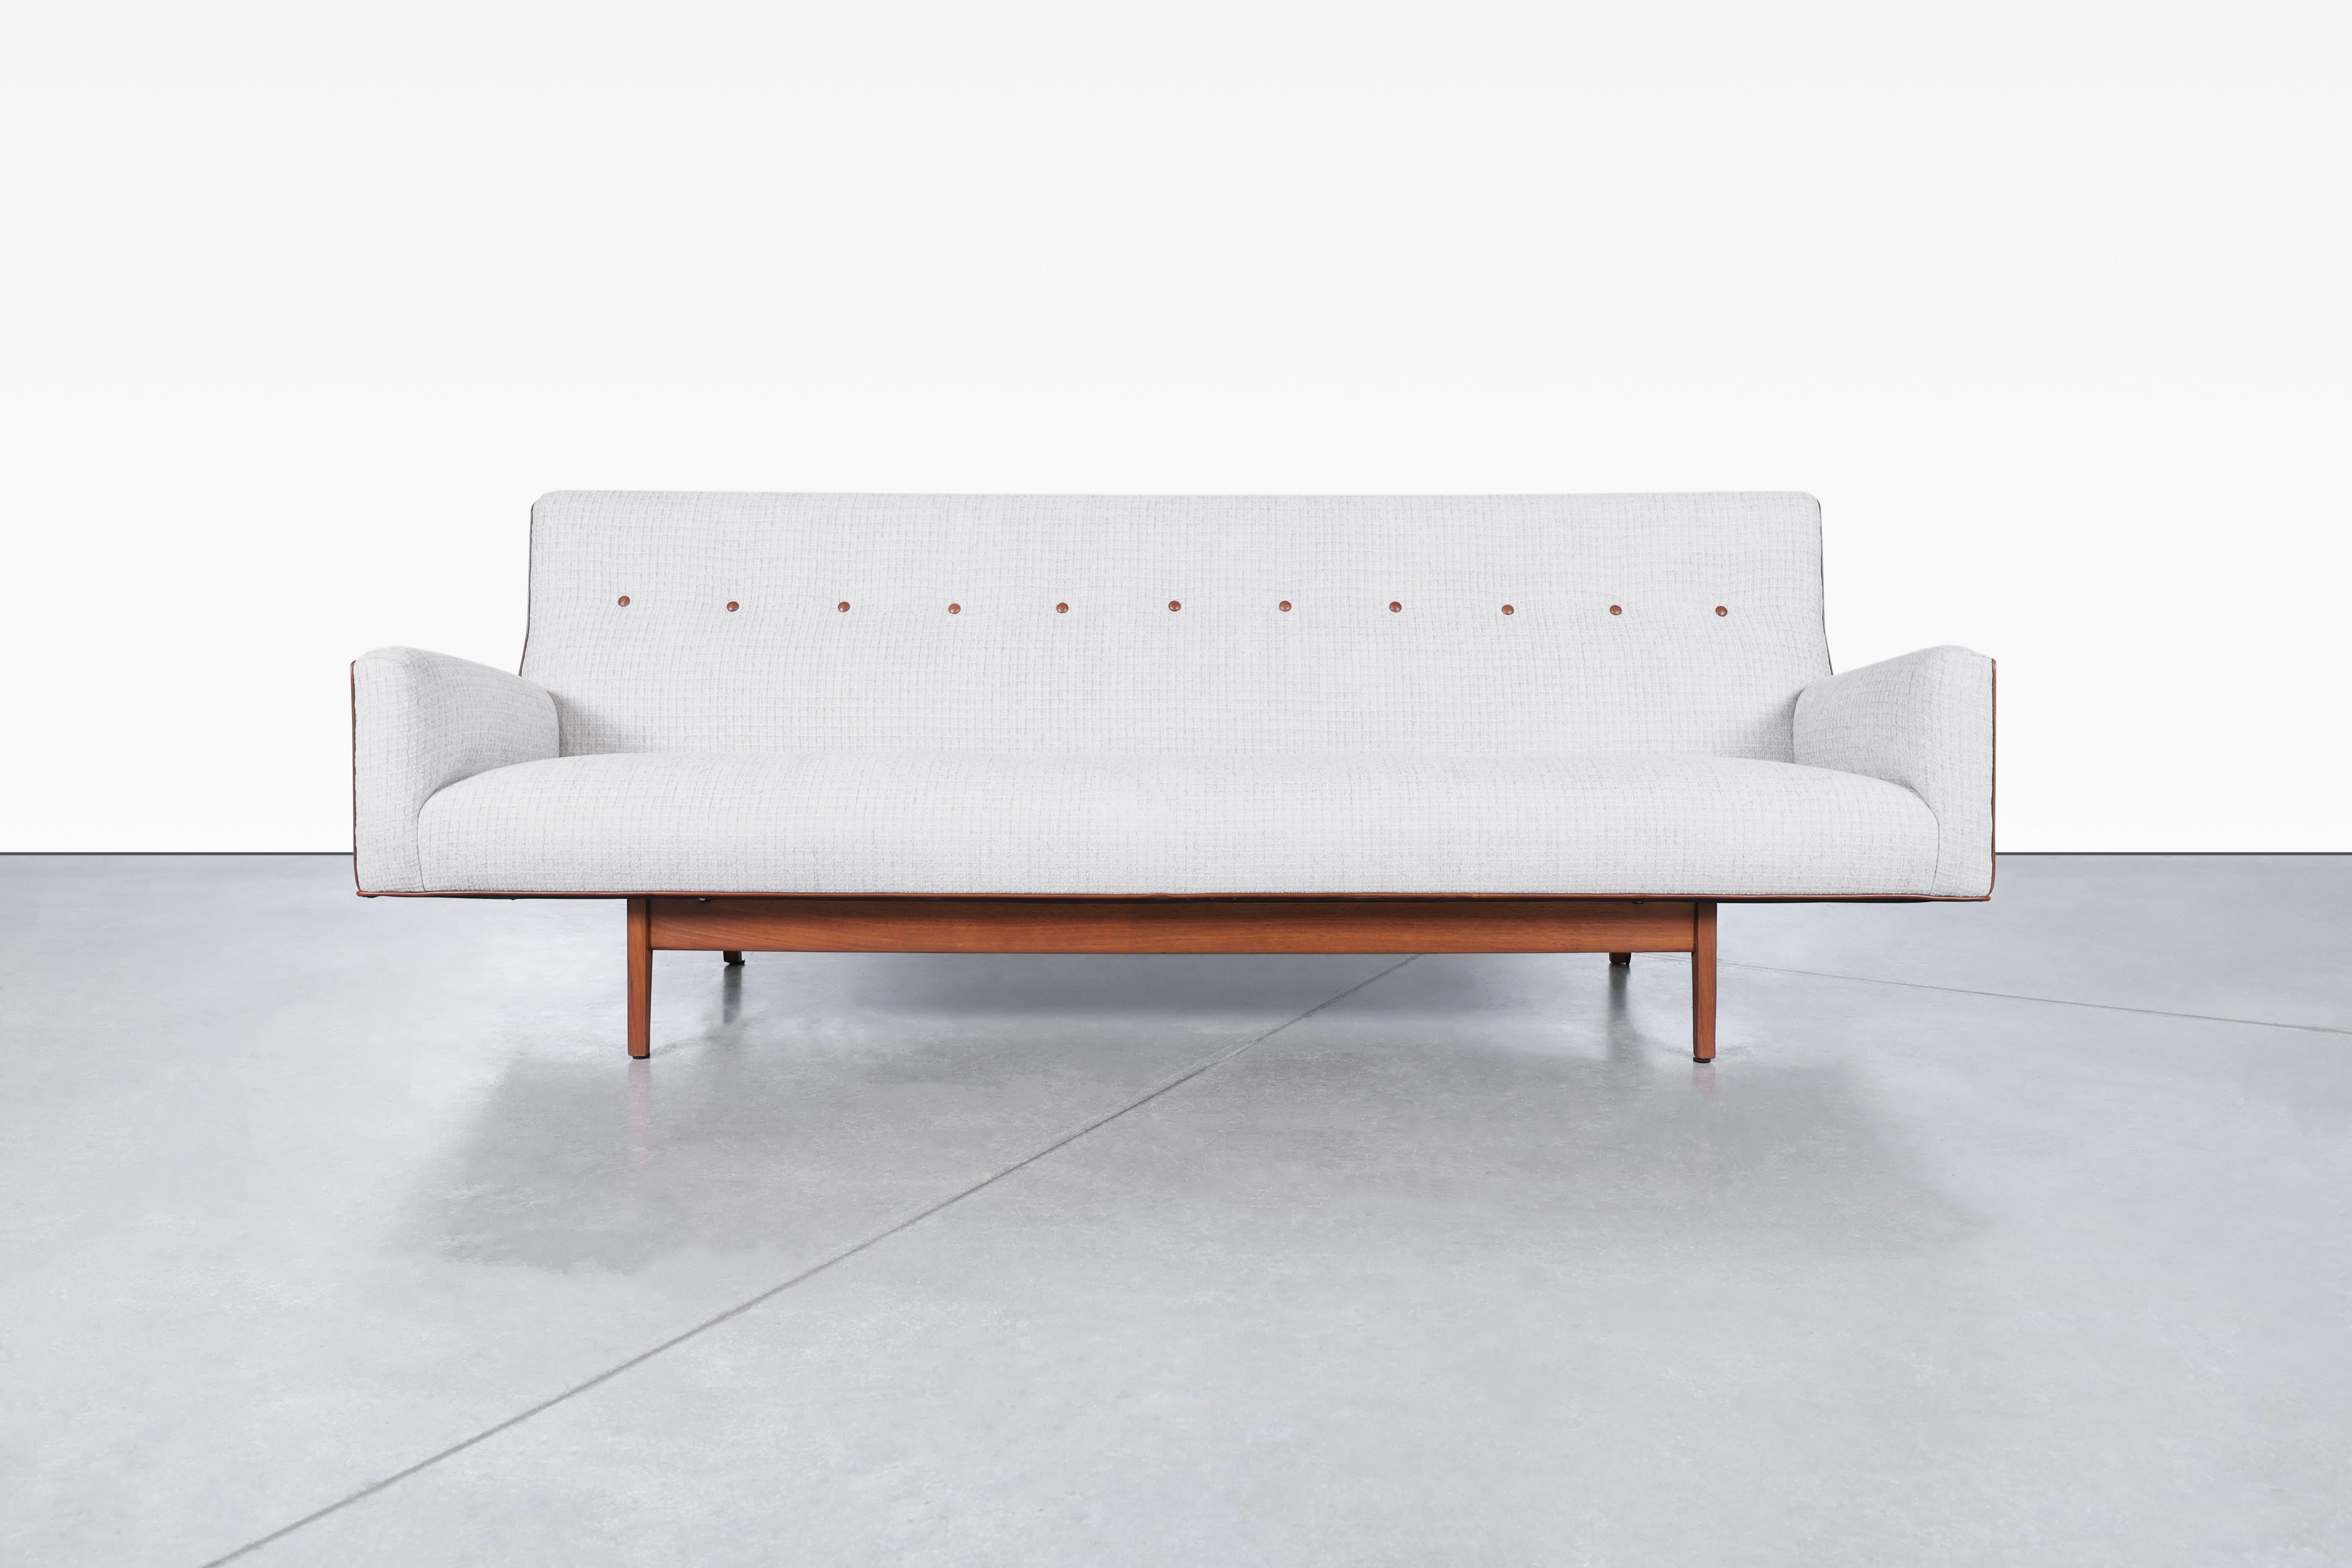 Vintage walnut sofa designed by the iconic designer Jens Risom in the United States, circa 1950s. Transform your living space with this exquisitely refinished and reupholstered classic design piece. The combination of rich walnut, plush chenille